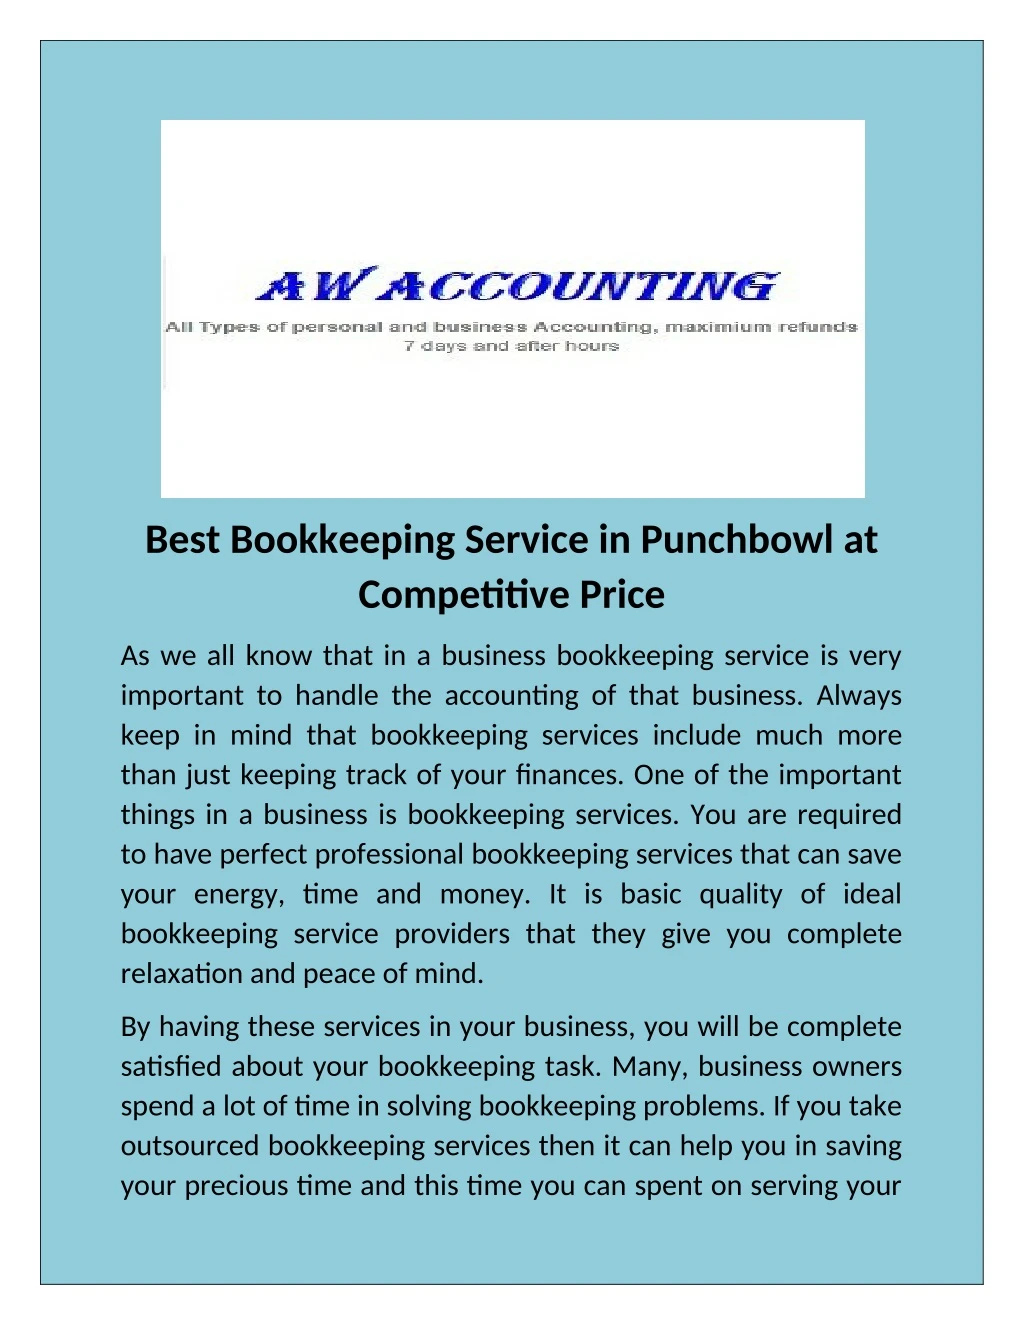 best bookkeeping service in punchbowl